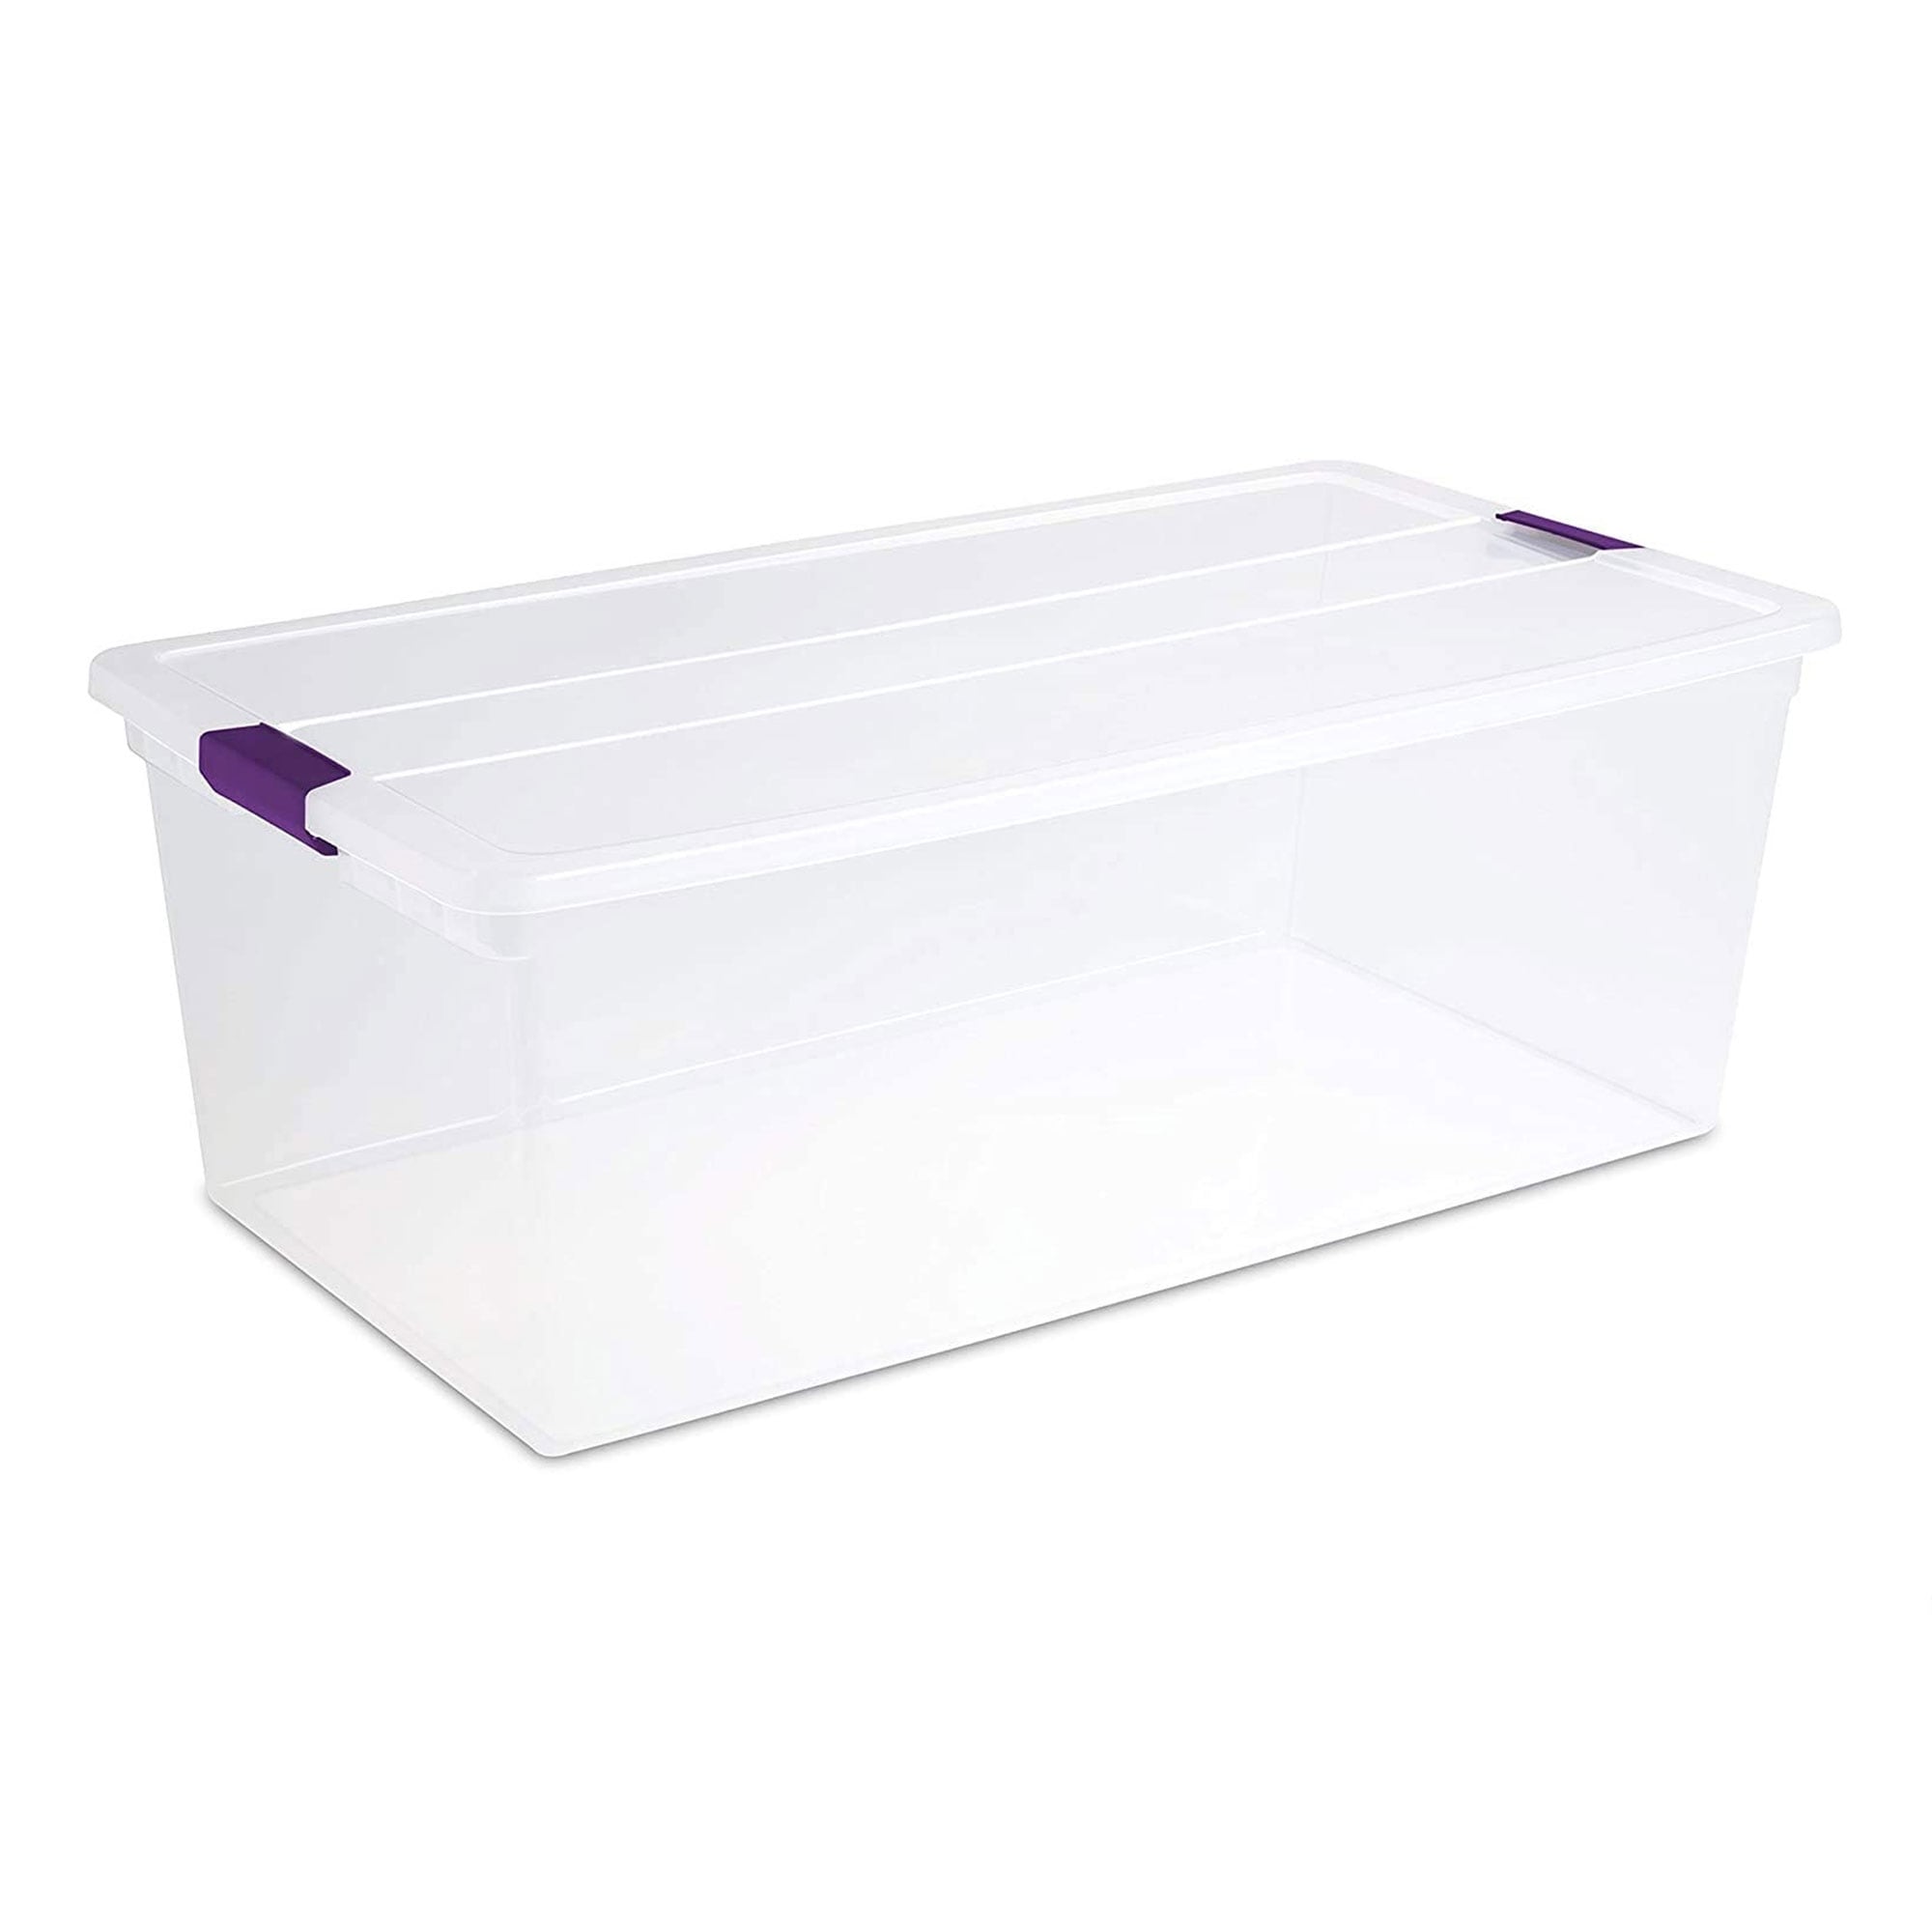 https://ak1.ostkcdn.com/images/products/is/images/direct/8235fd4984e365a01fcc1f56f44ae3149afcde84/Sterilite-110-Qt-Clear-Storage-Organization-Box-w--Secure-Latching-Lid-%2816-Pack%29.jpg